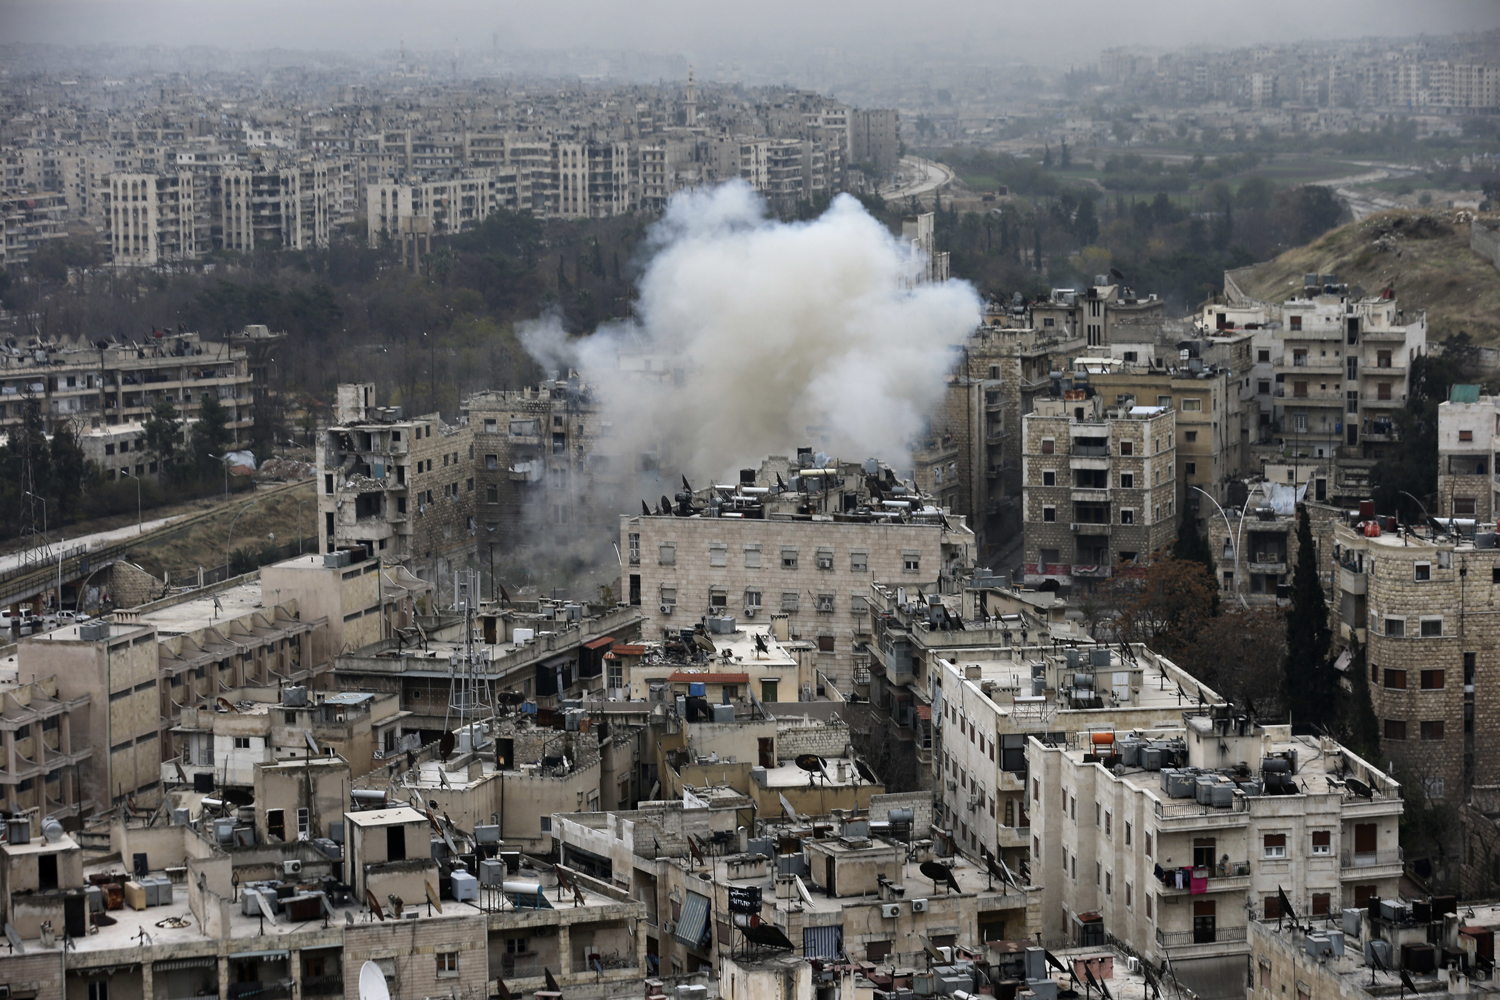 Smoke rises after rebel fighters launch a mortar shell on residential neighborhood in west Aleppo, Syria, Monday, Dec. 5, 2016. The government seized large swaths of the Aleppo enclave under rebel control since 2012 in the offensive that began last week. (Hassan Ammar/AP)